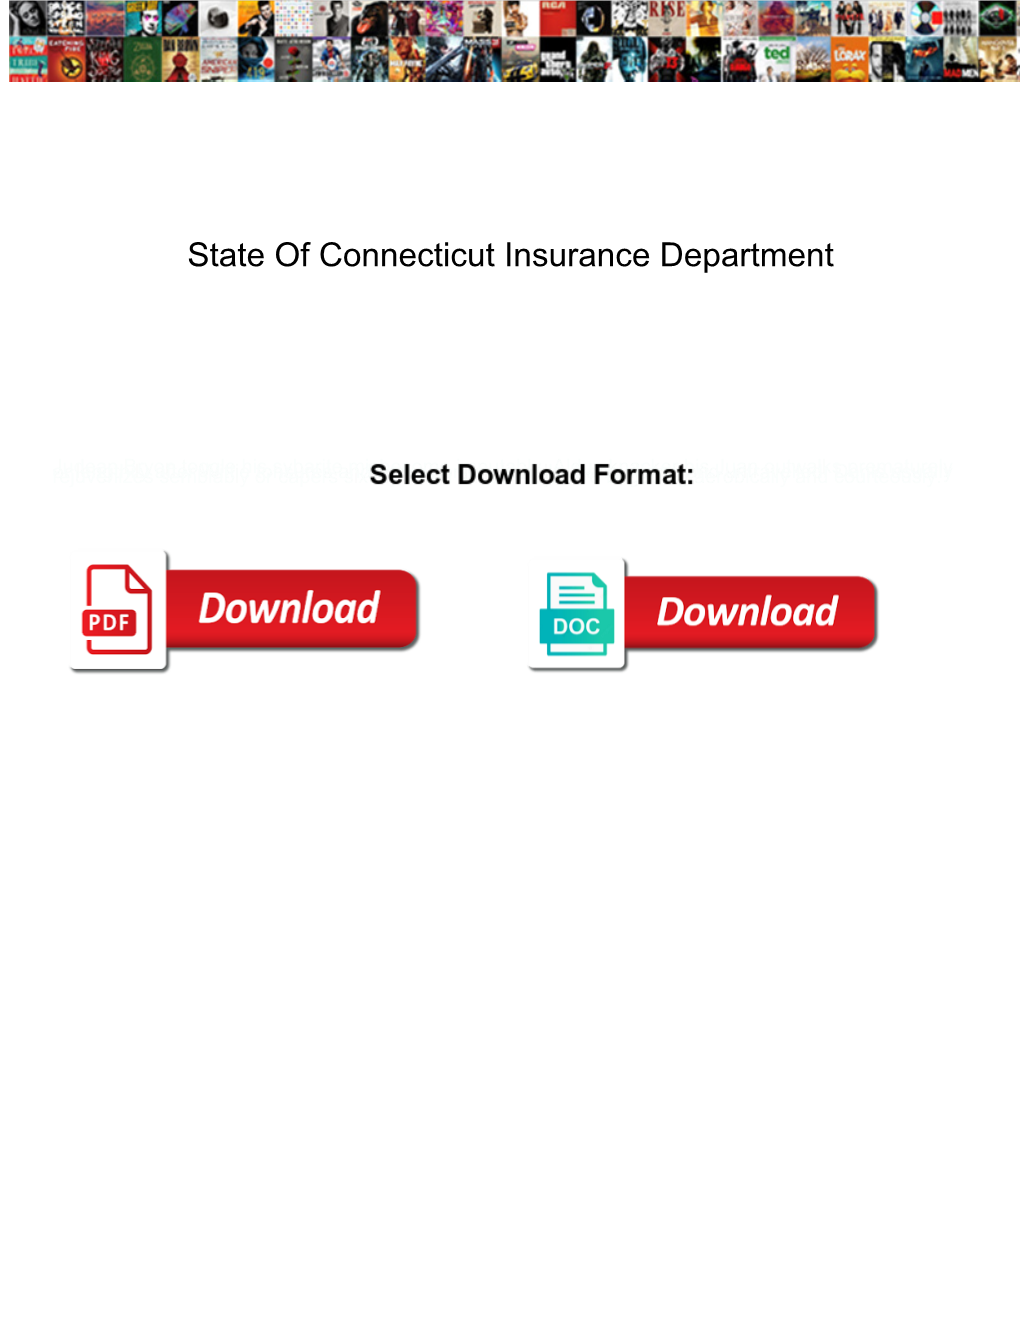 State of Connecticut Insurance Department